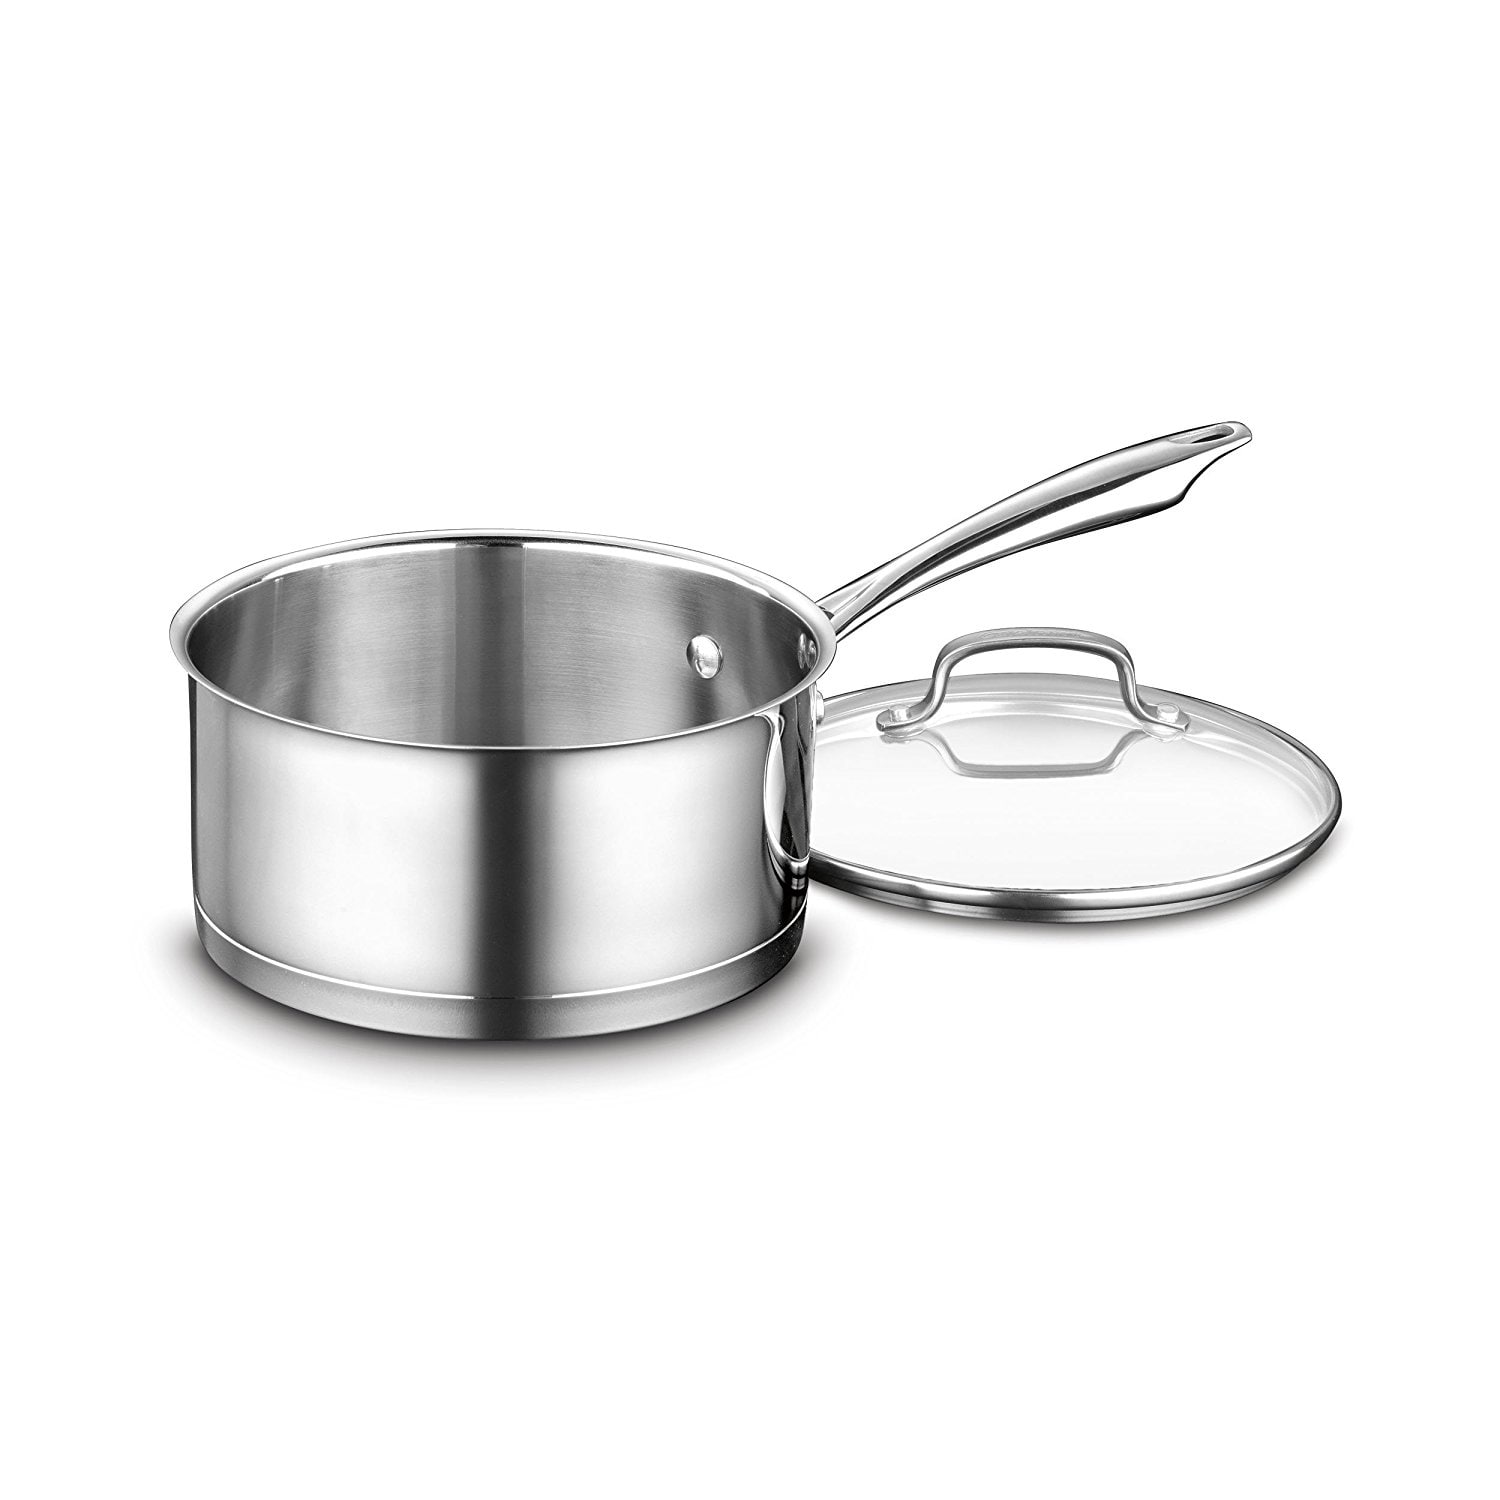 https://ak1.ostkcdn.com/images/products/is/images/direct/1f57bbf8d17c1a55f50d85e5acfab5902e519ead/Cuisinart-89193-20-Professional-Stainless-Saucepan-with-Cover%2C-3-Quart%2C-Stainless-Steel.jpg